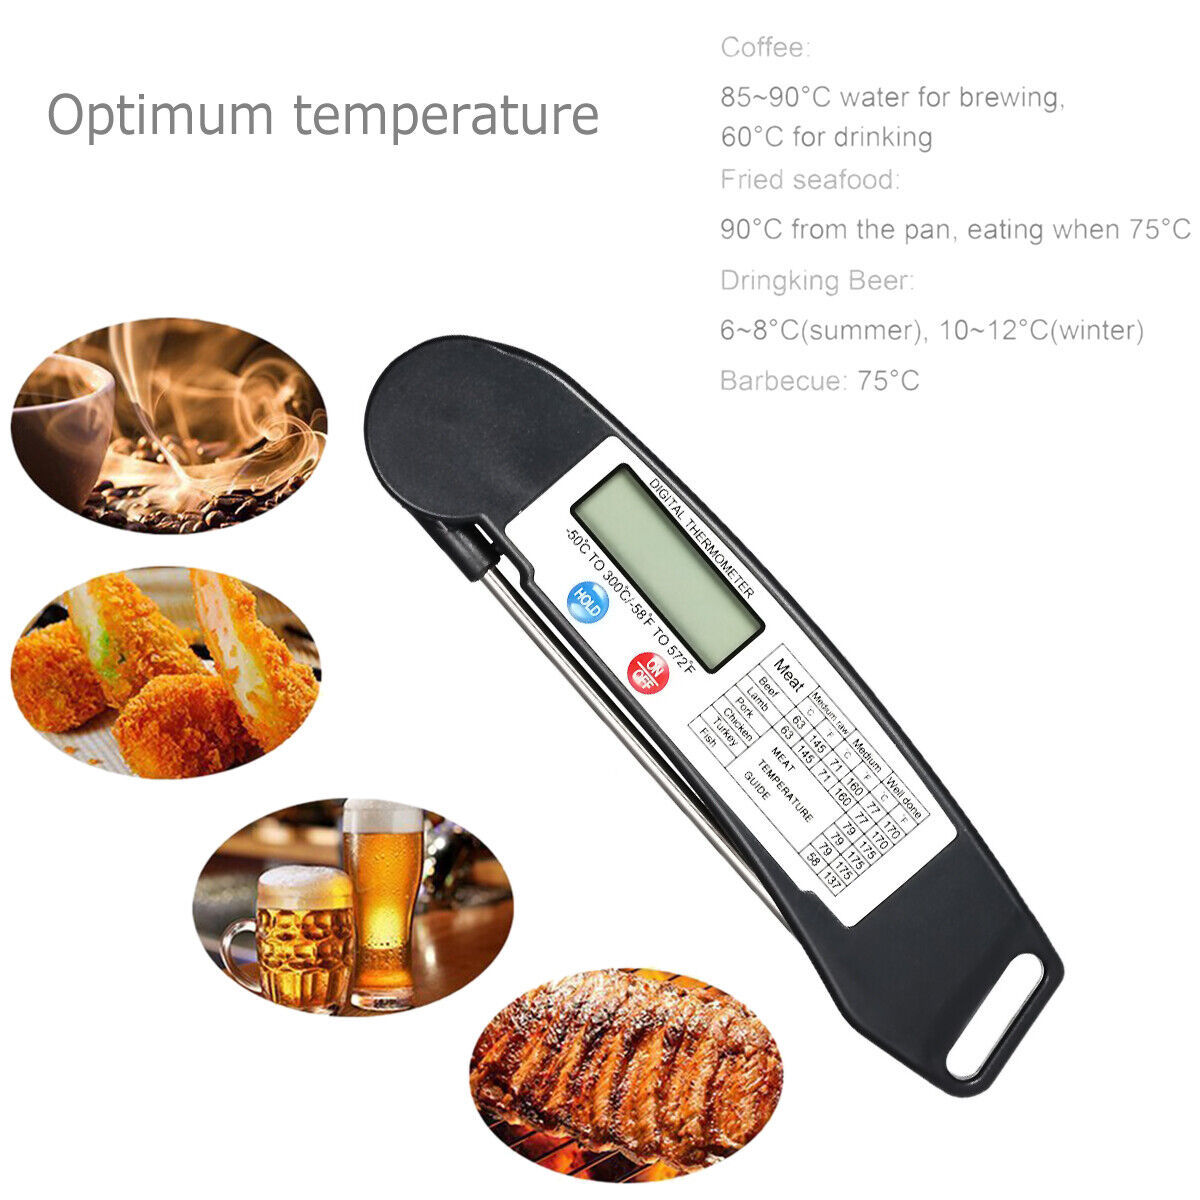  Oregon Scientific AW129 Wireless BBQ Thermometer with Probe  Thermometer and Remote : Meat Thermometers : Home & Kitchen